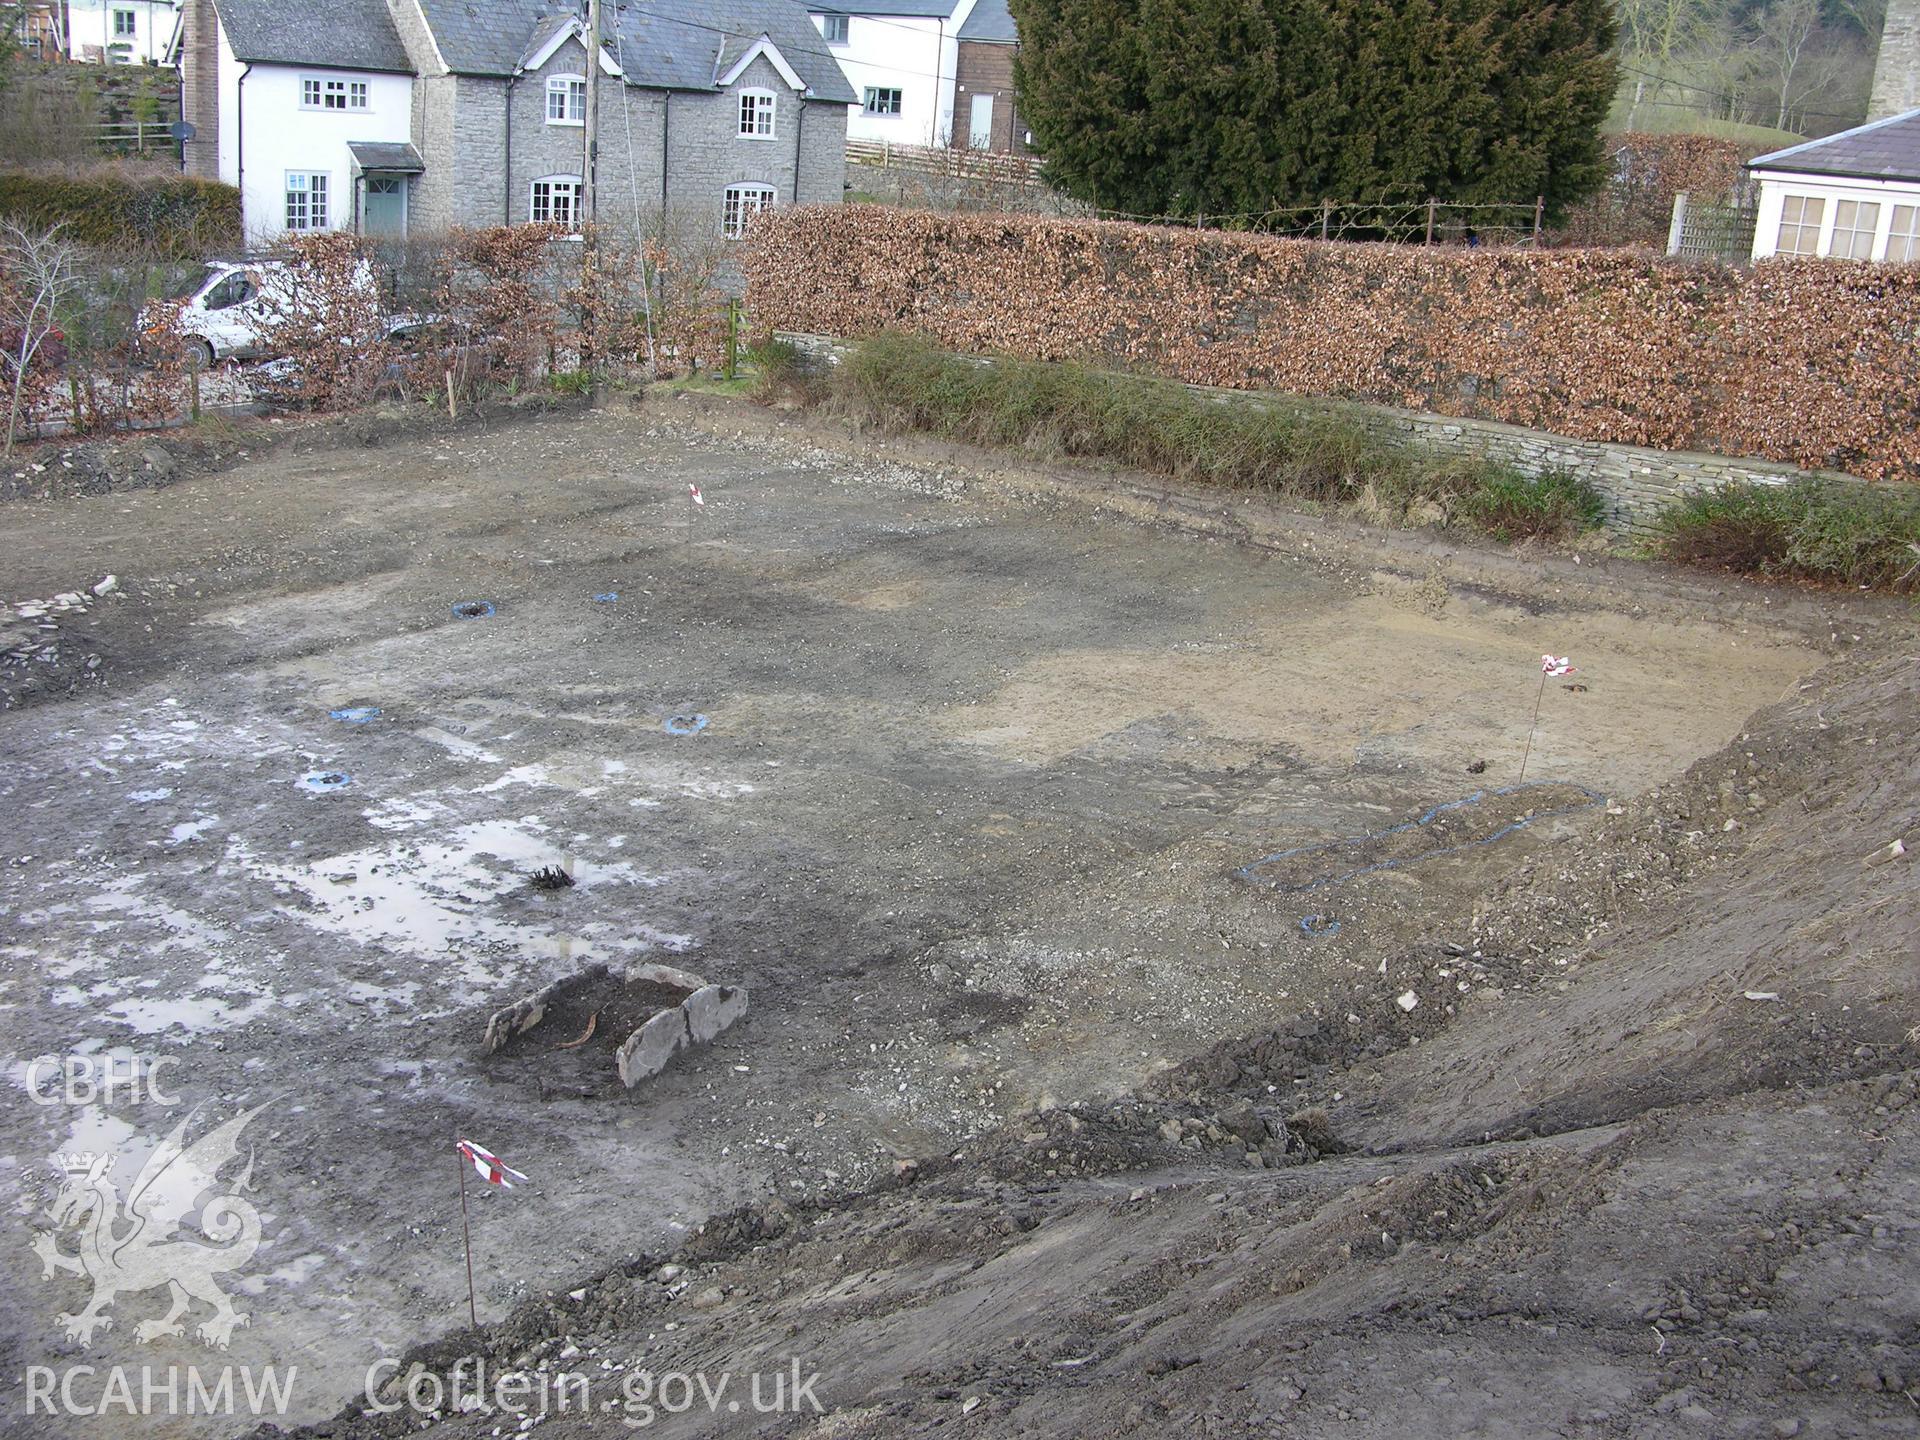 Colour digital photograph showing general overview of the excavation area - part of the Archaeological Excavation report for Horse Yard Farm, Evenjobb (CAP Report 607) by Chris E Smith, from a Cambrian Archaeological Projects assessment survey.